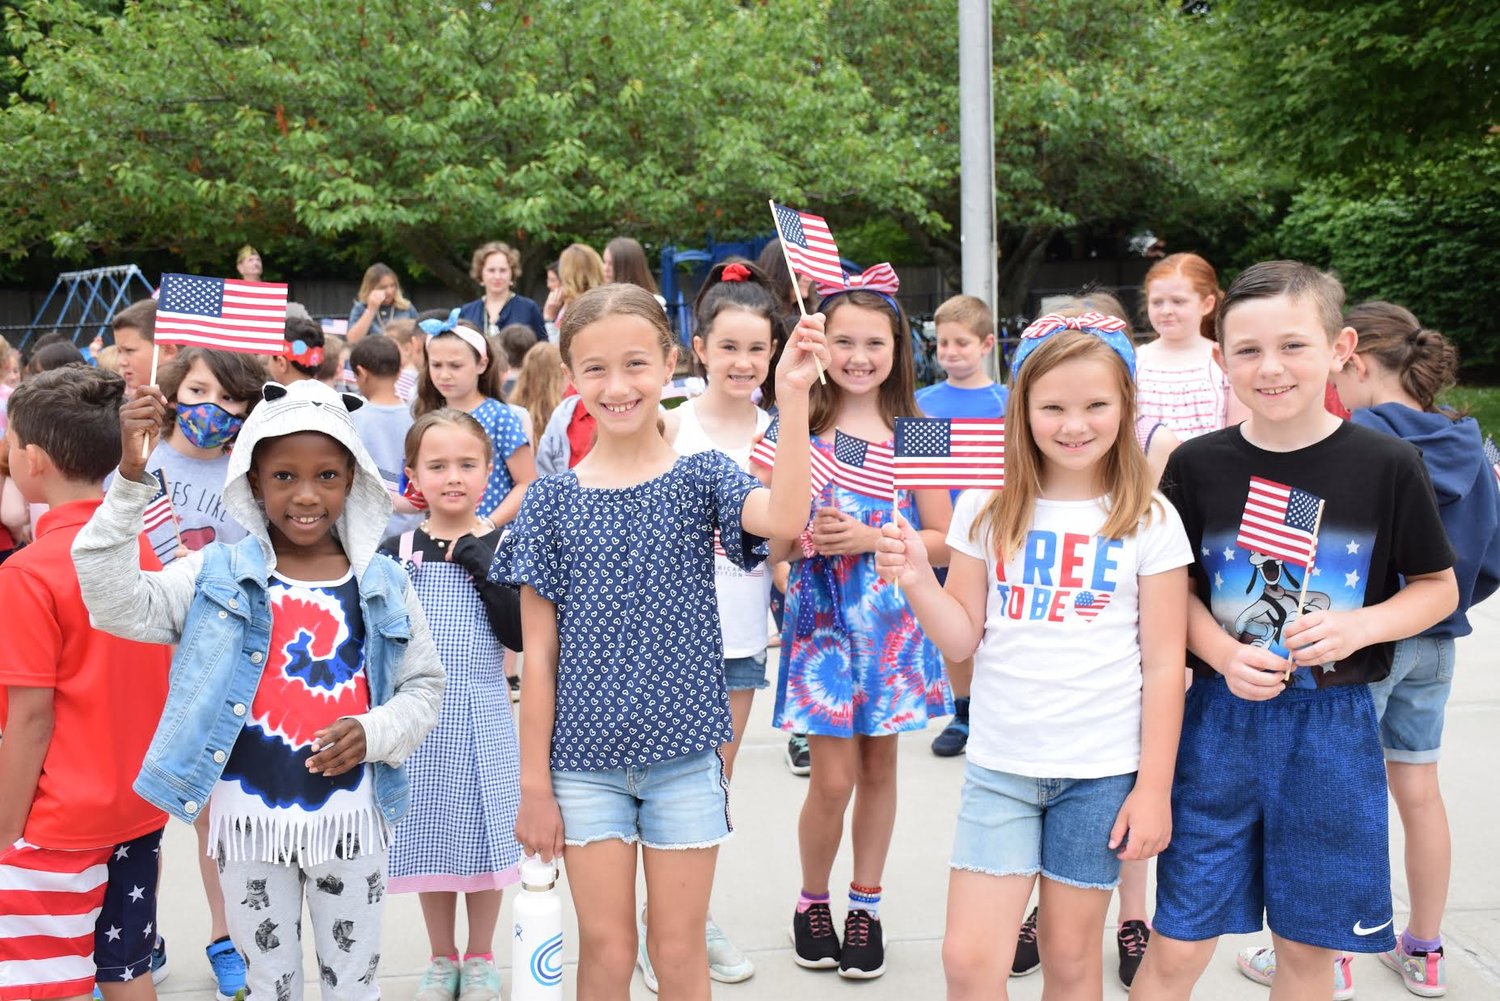 Sylvan Avenue Elementary School students raise their flags during a Flag Day celebration on June 14.